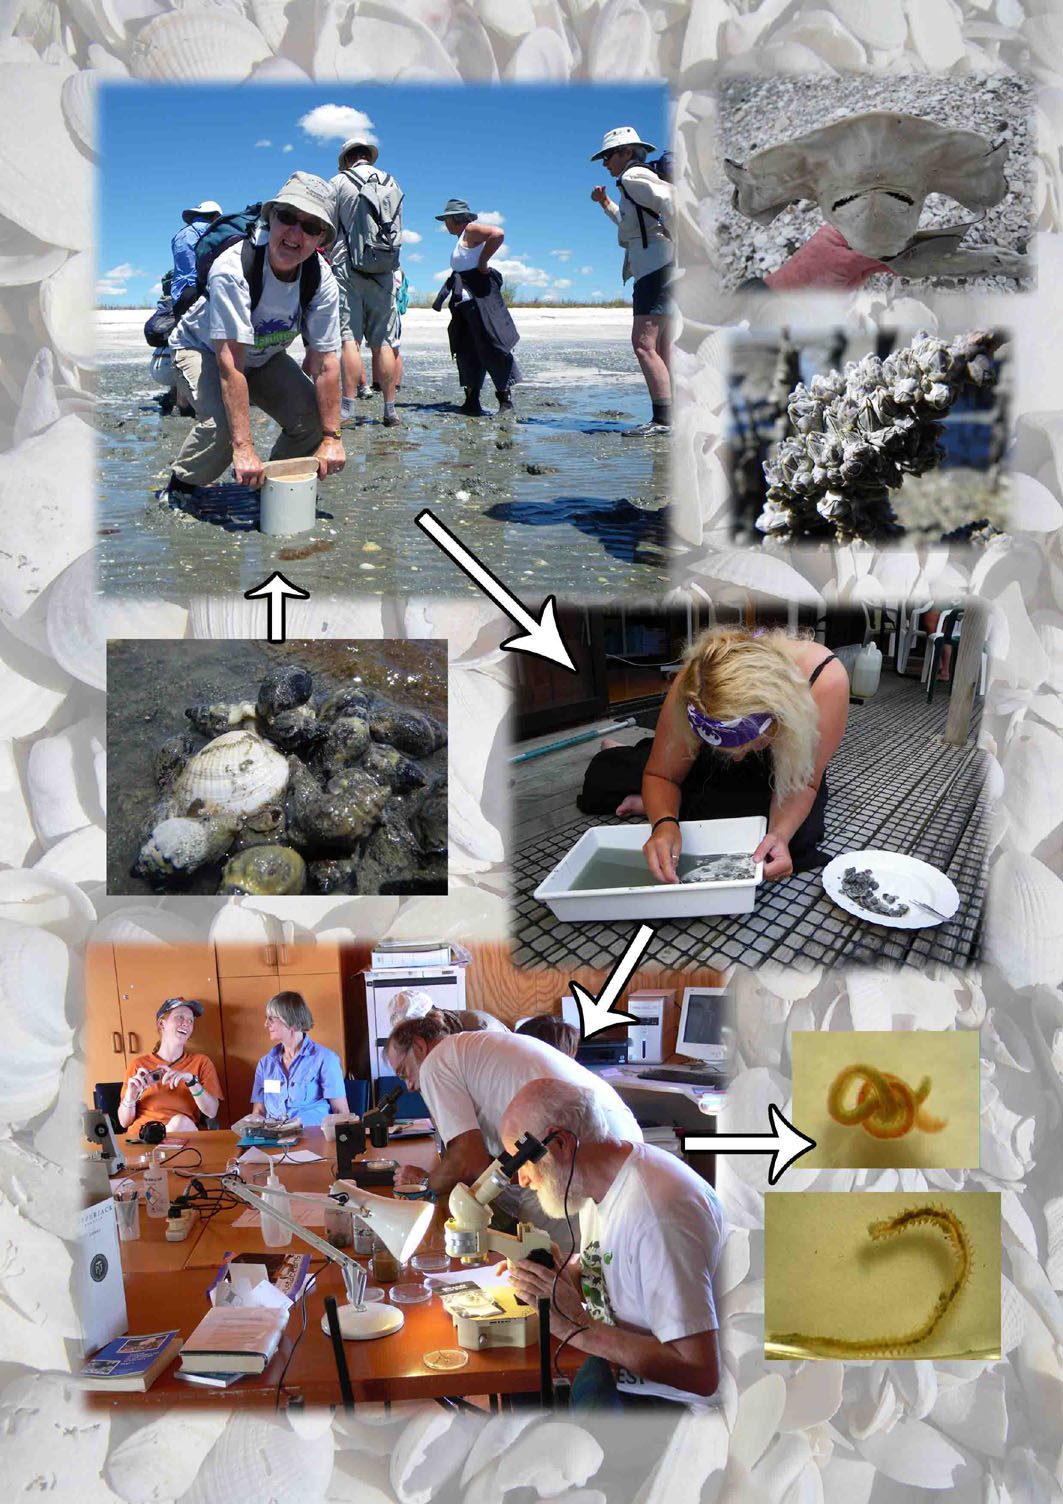 Join us for our next Field Course January 2012